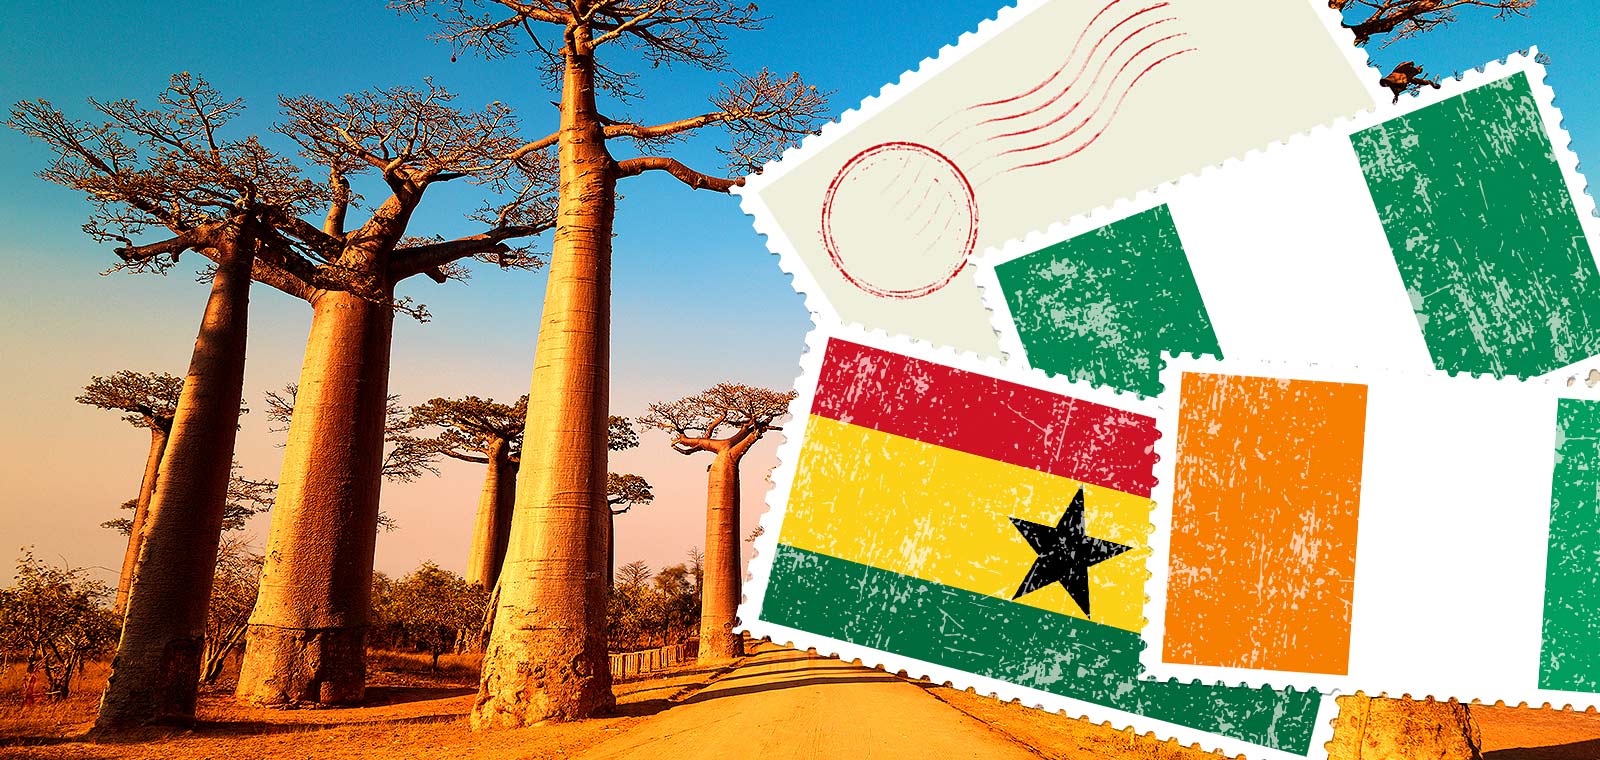 Postcard from… West Africa